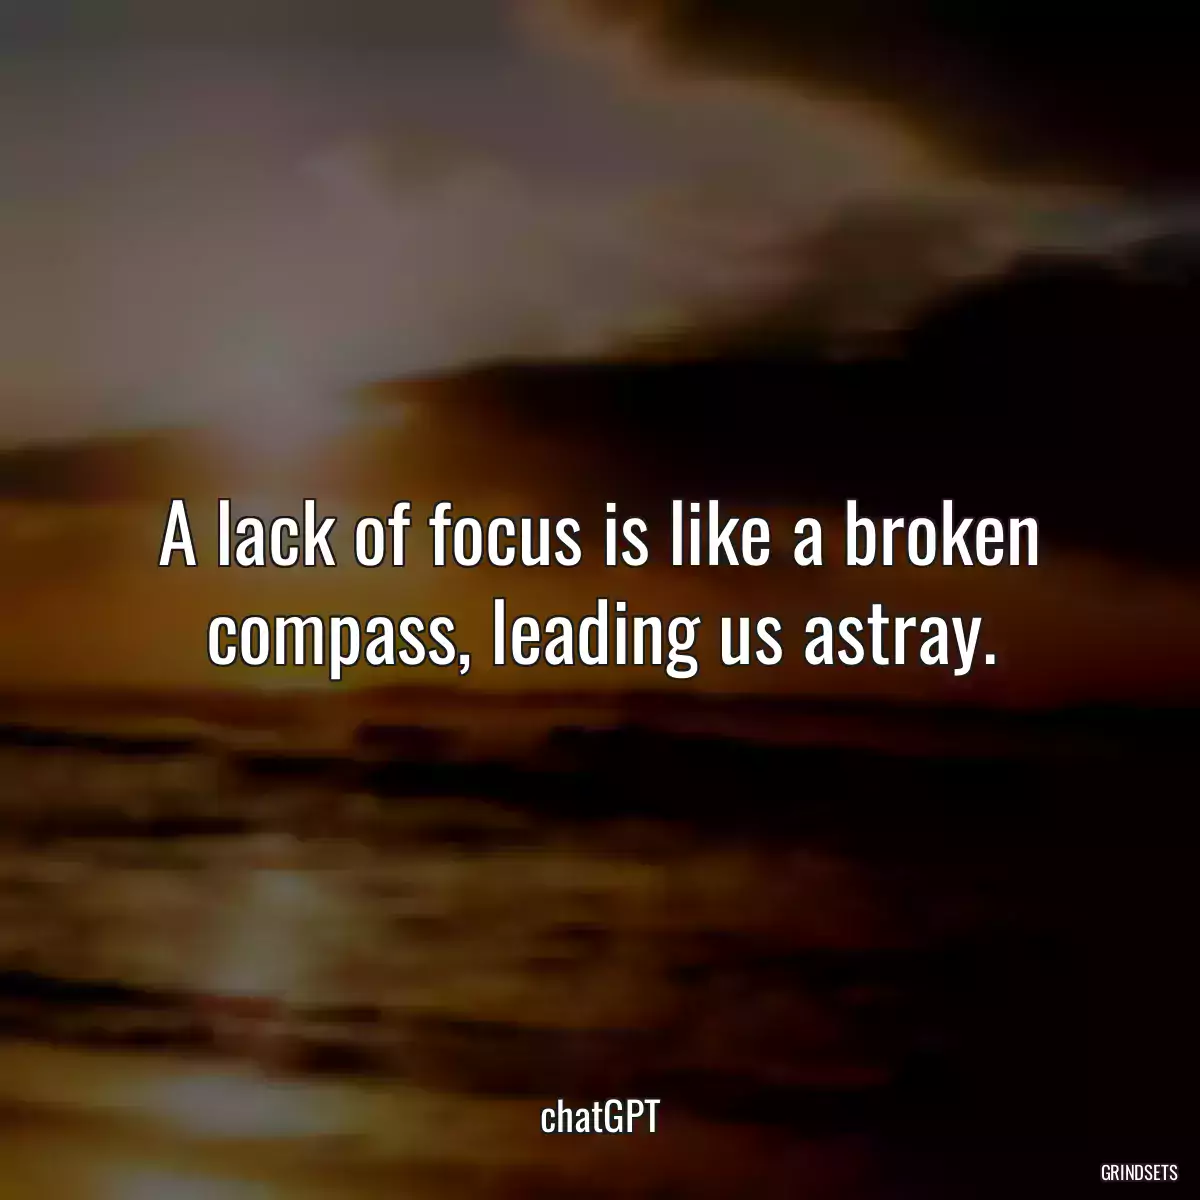 A lack of focus is like a broken compass, leading us astray.